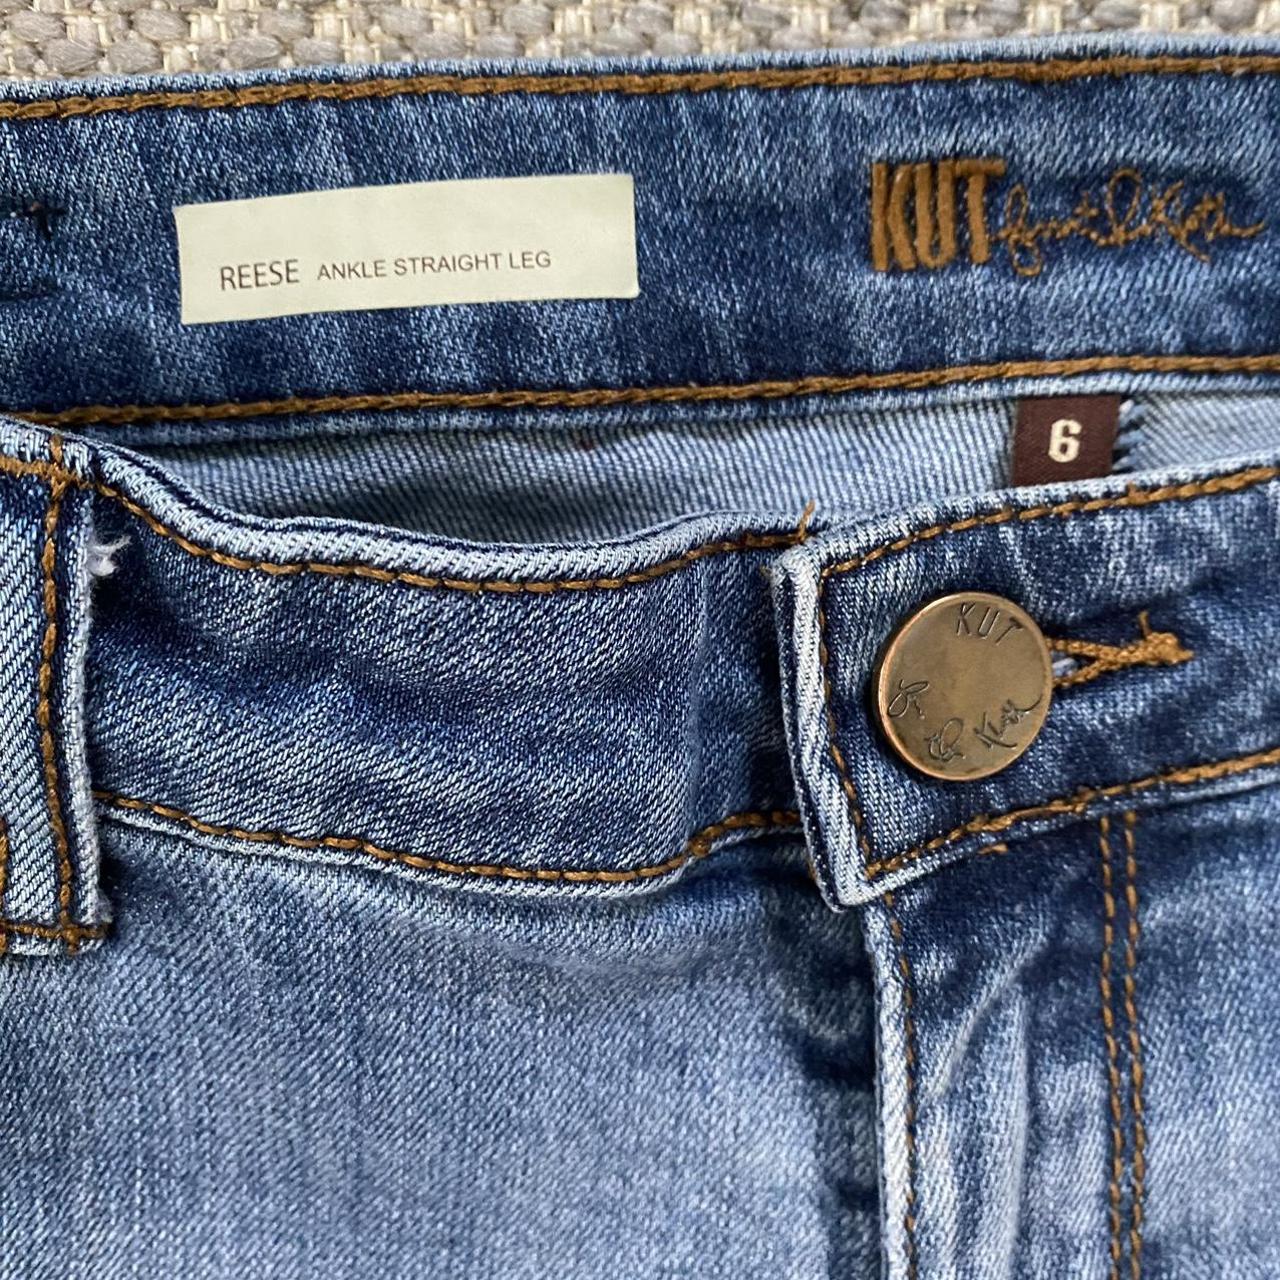 Kut from the Kloth Women's Jeans (4)